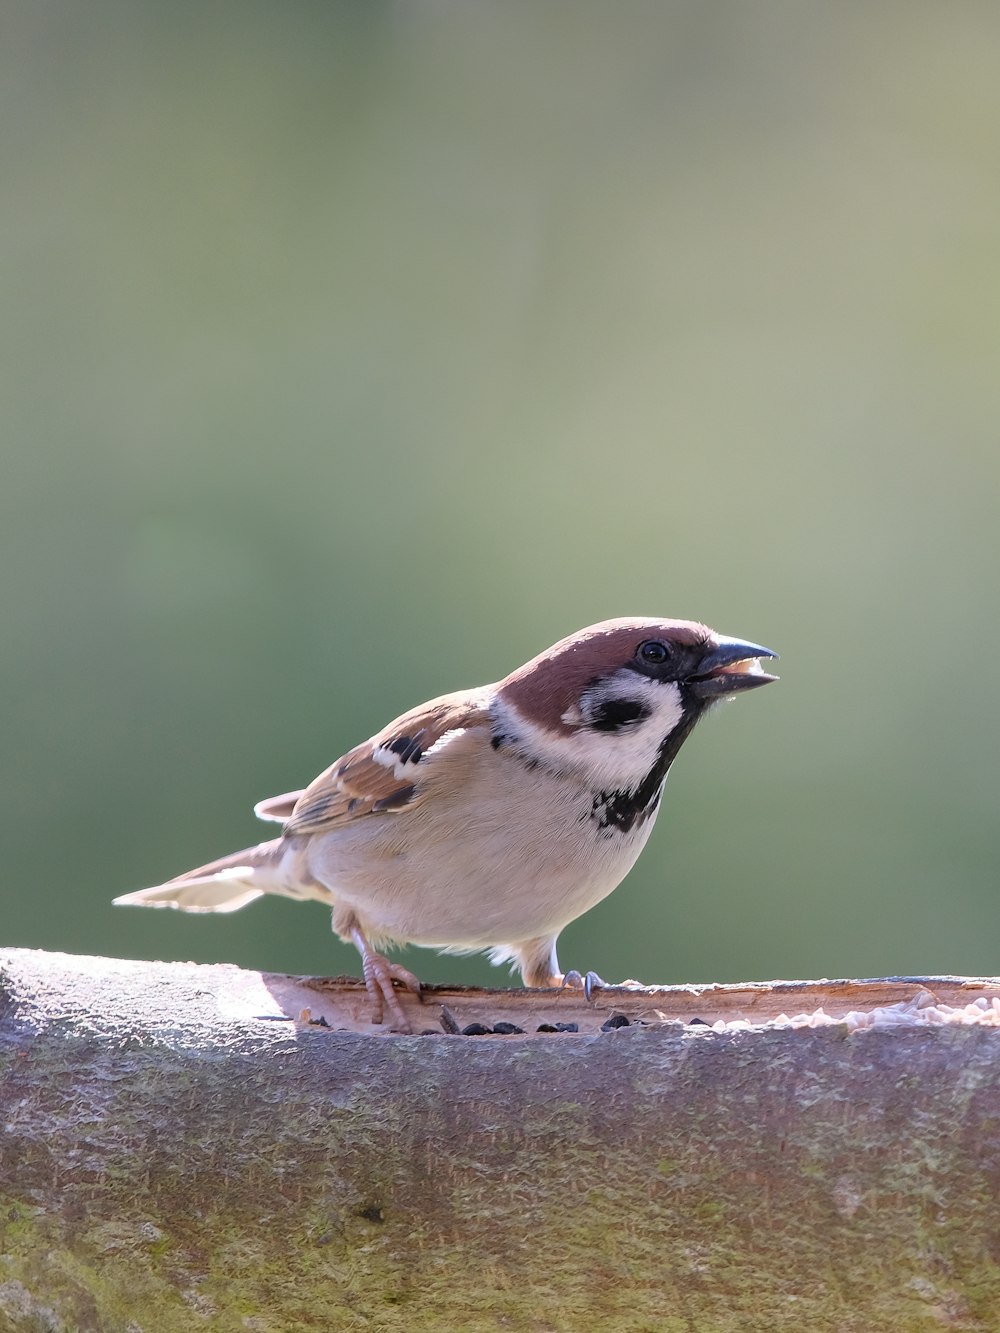 a small bird perched on a piece of wood